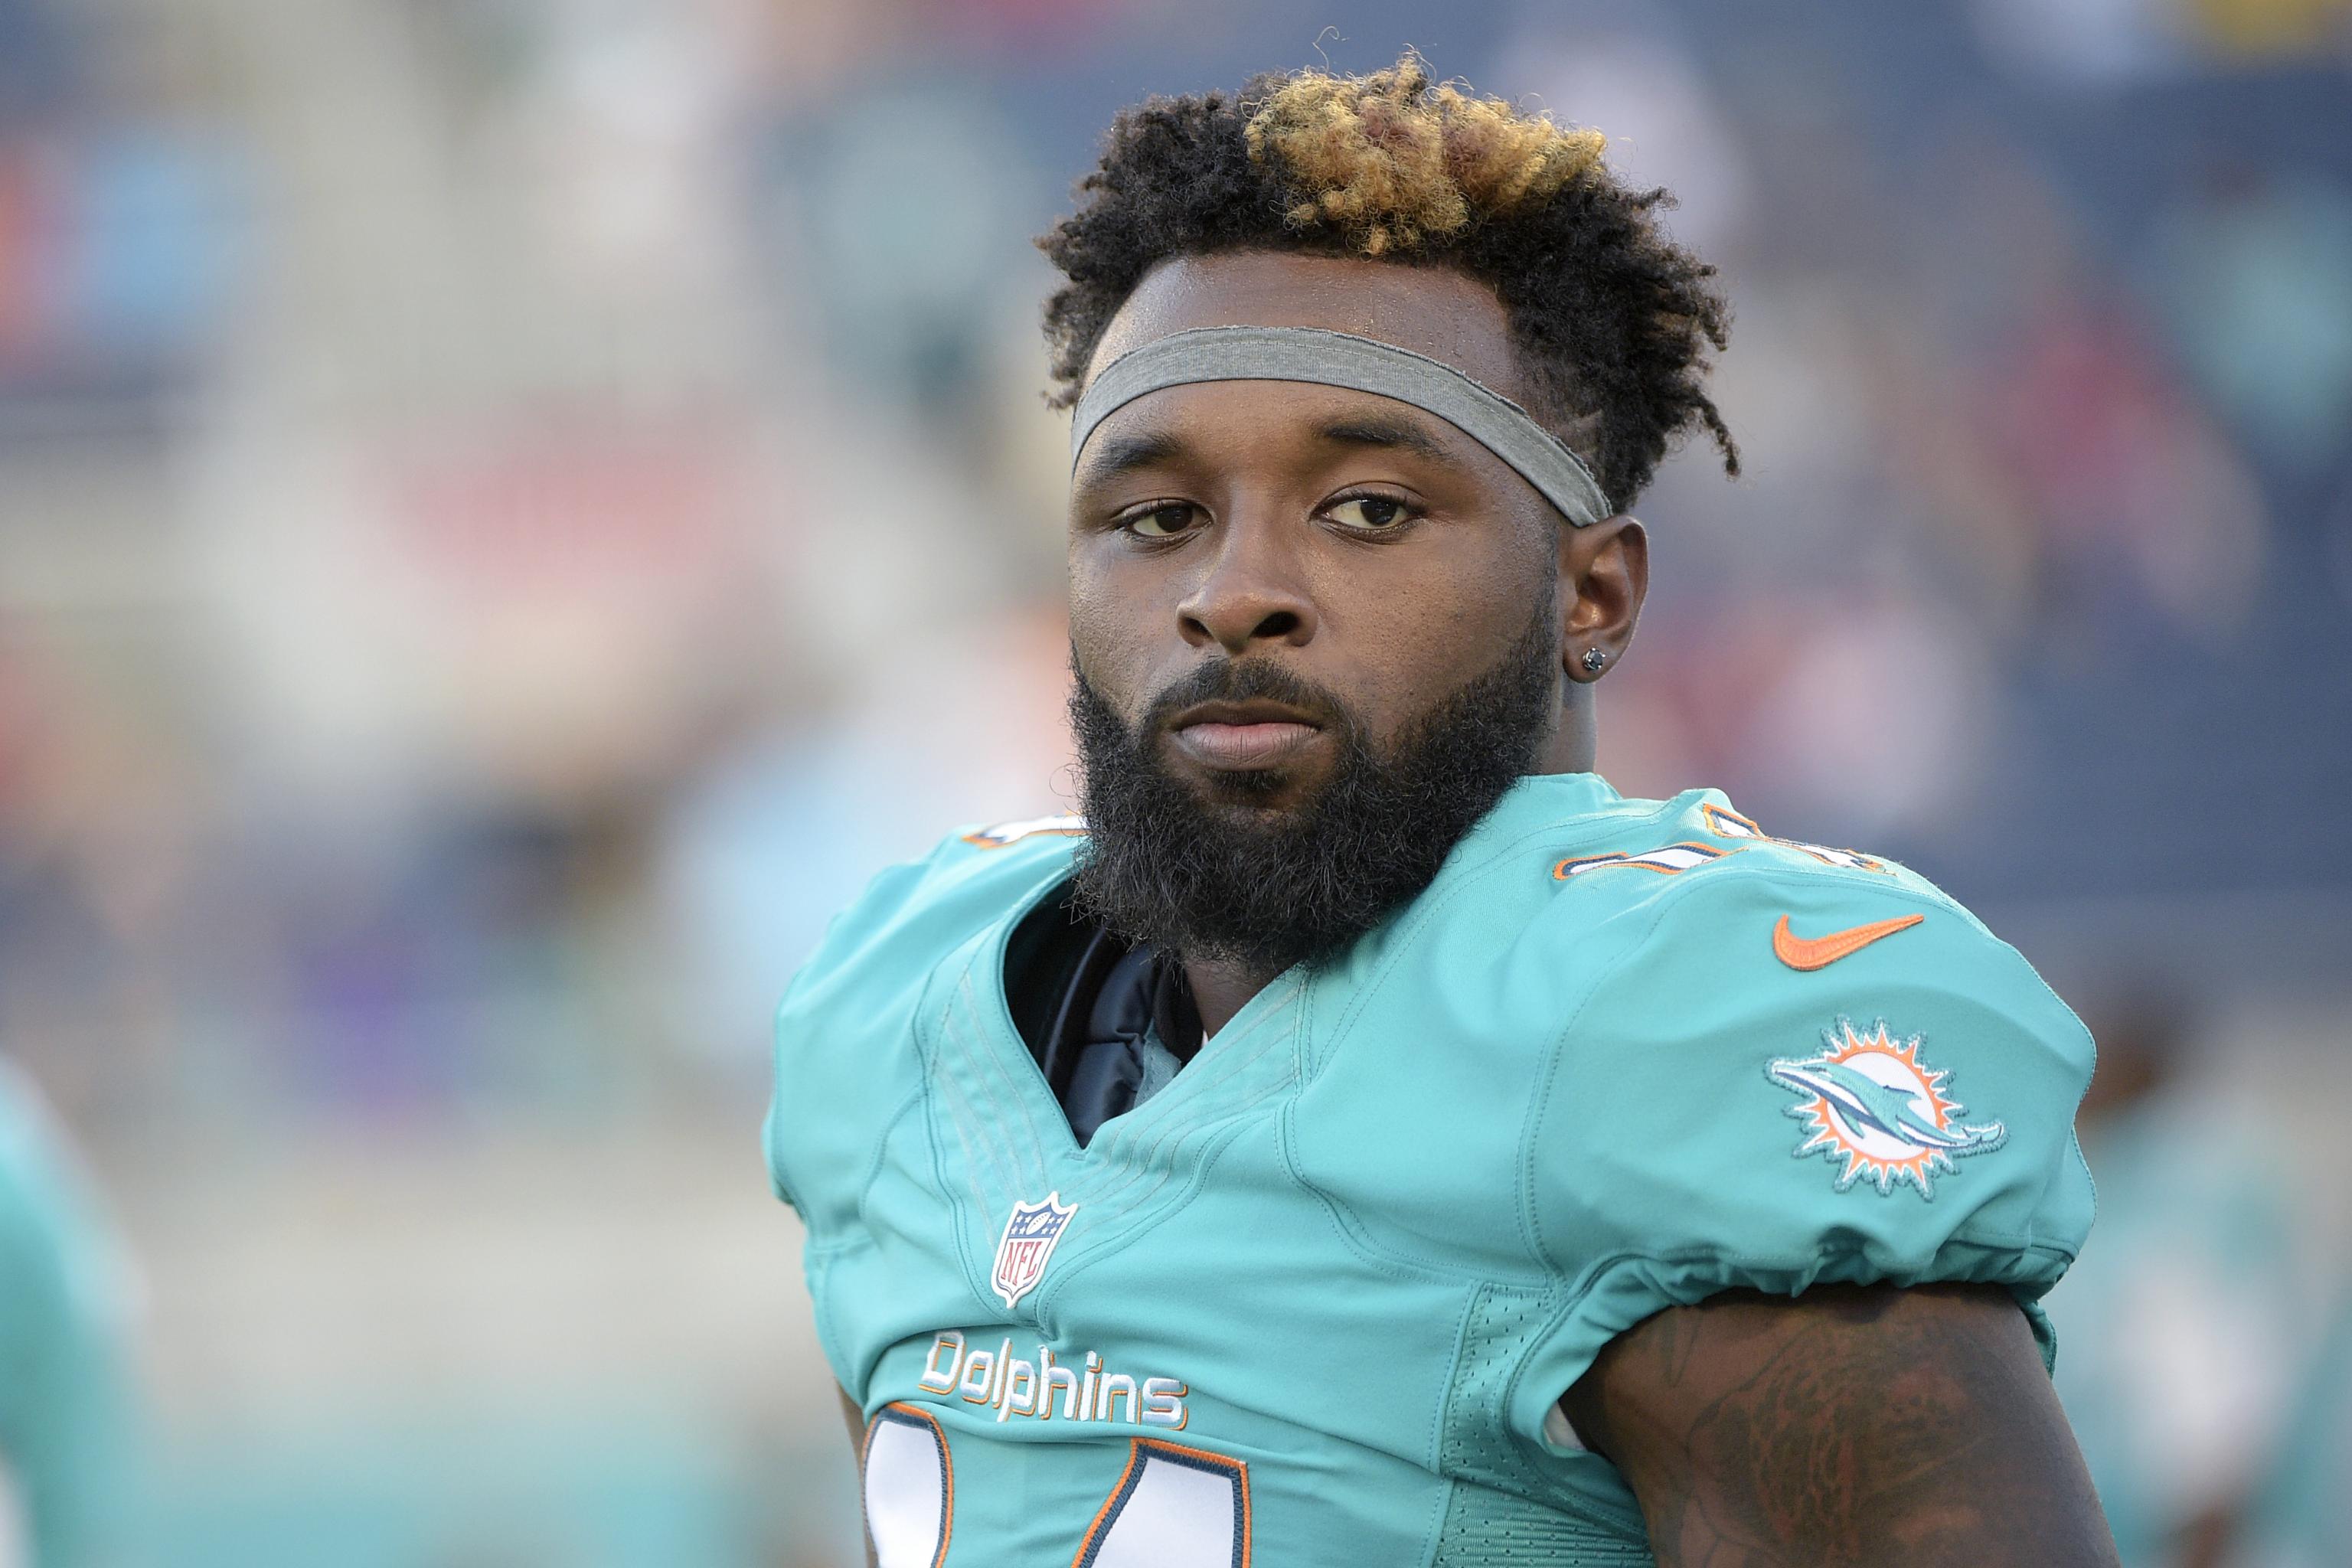 Miami Dolphins WR Jarvis Landry makes NFL's Top 100 players - ESPN